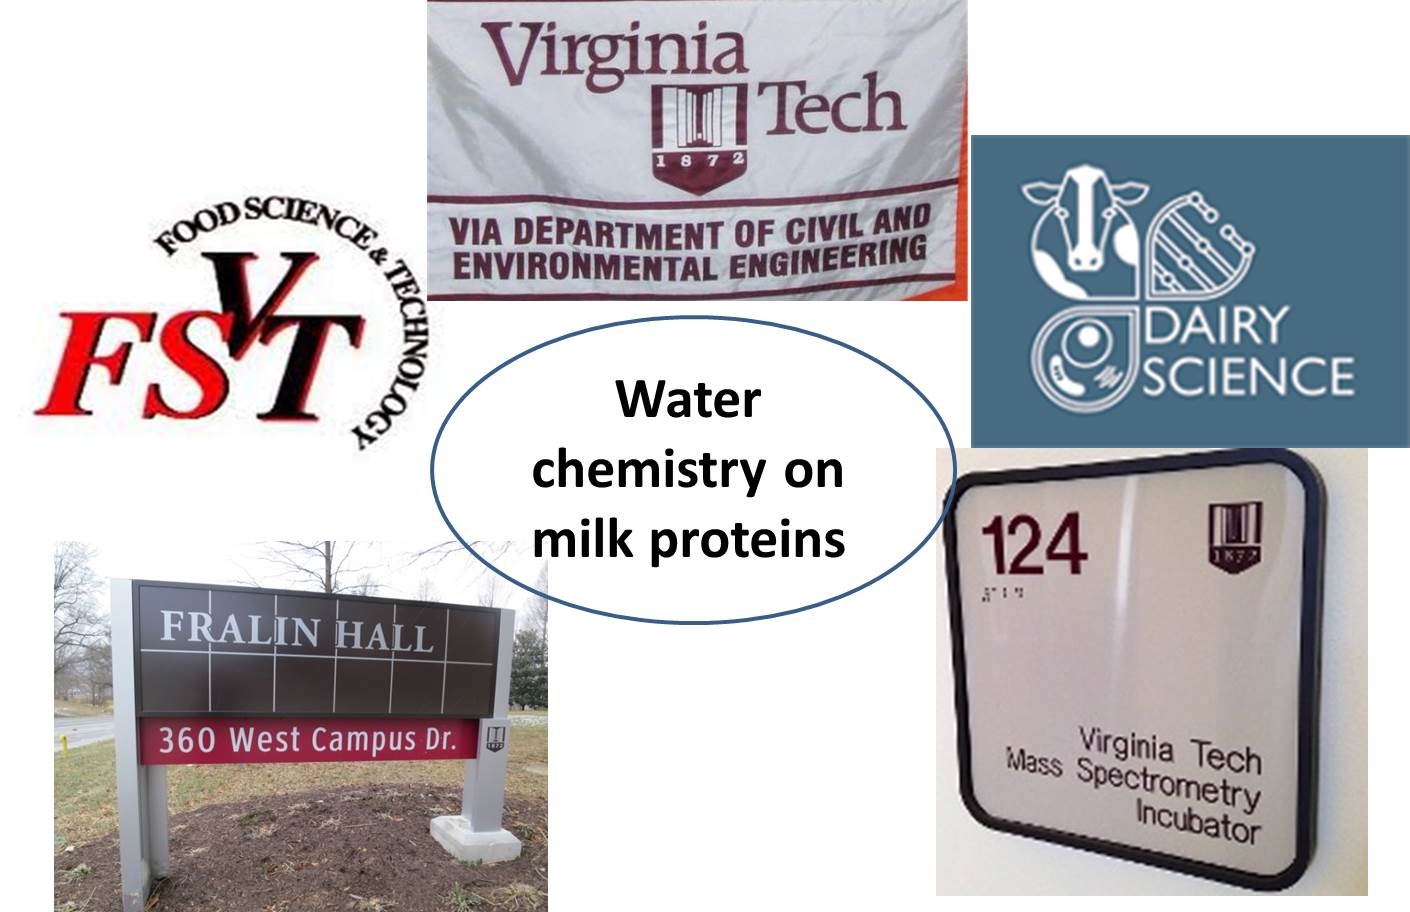 A series of pictures showing Virginia Tech departments involved in food, dairy, water, and other sciences